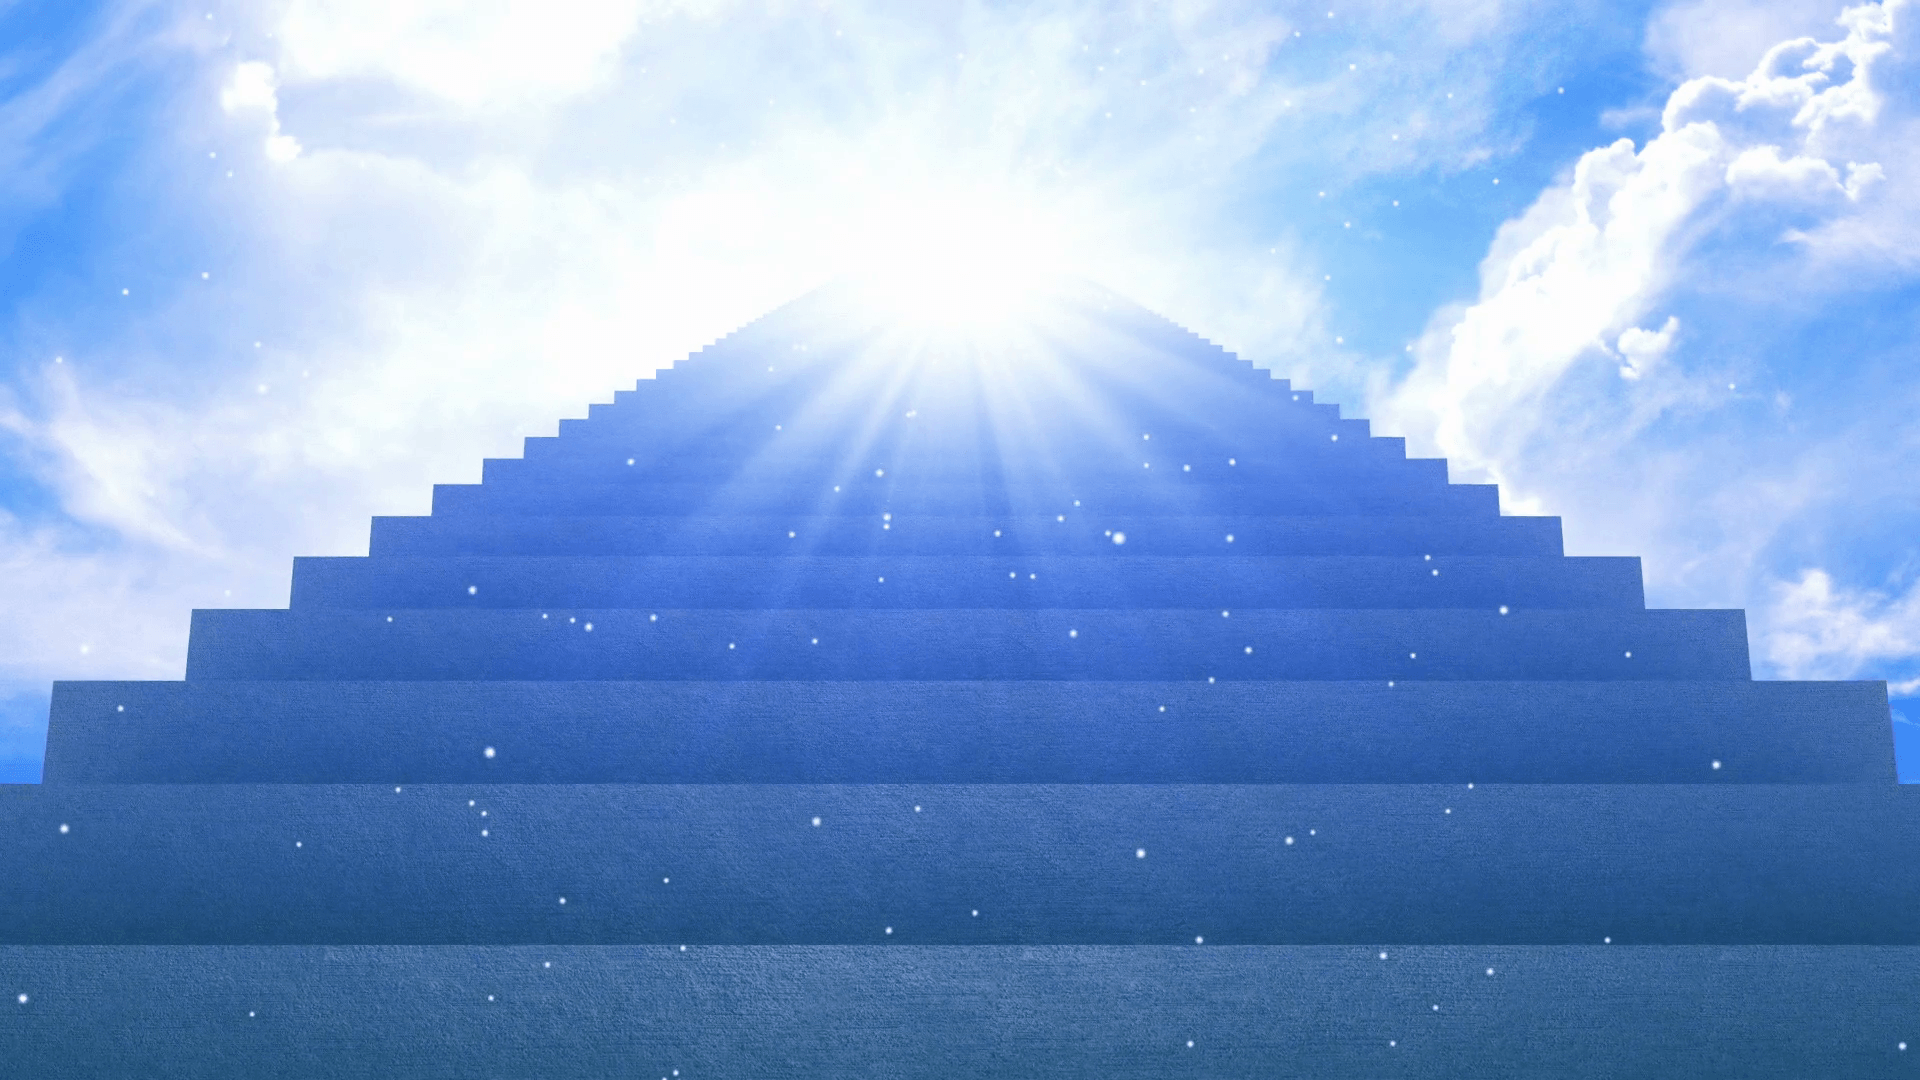 Stairs Going Leading up to a Divine Light Source in The Bright Blue